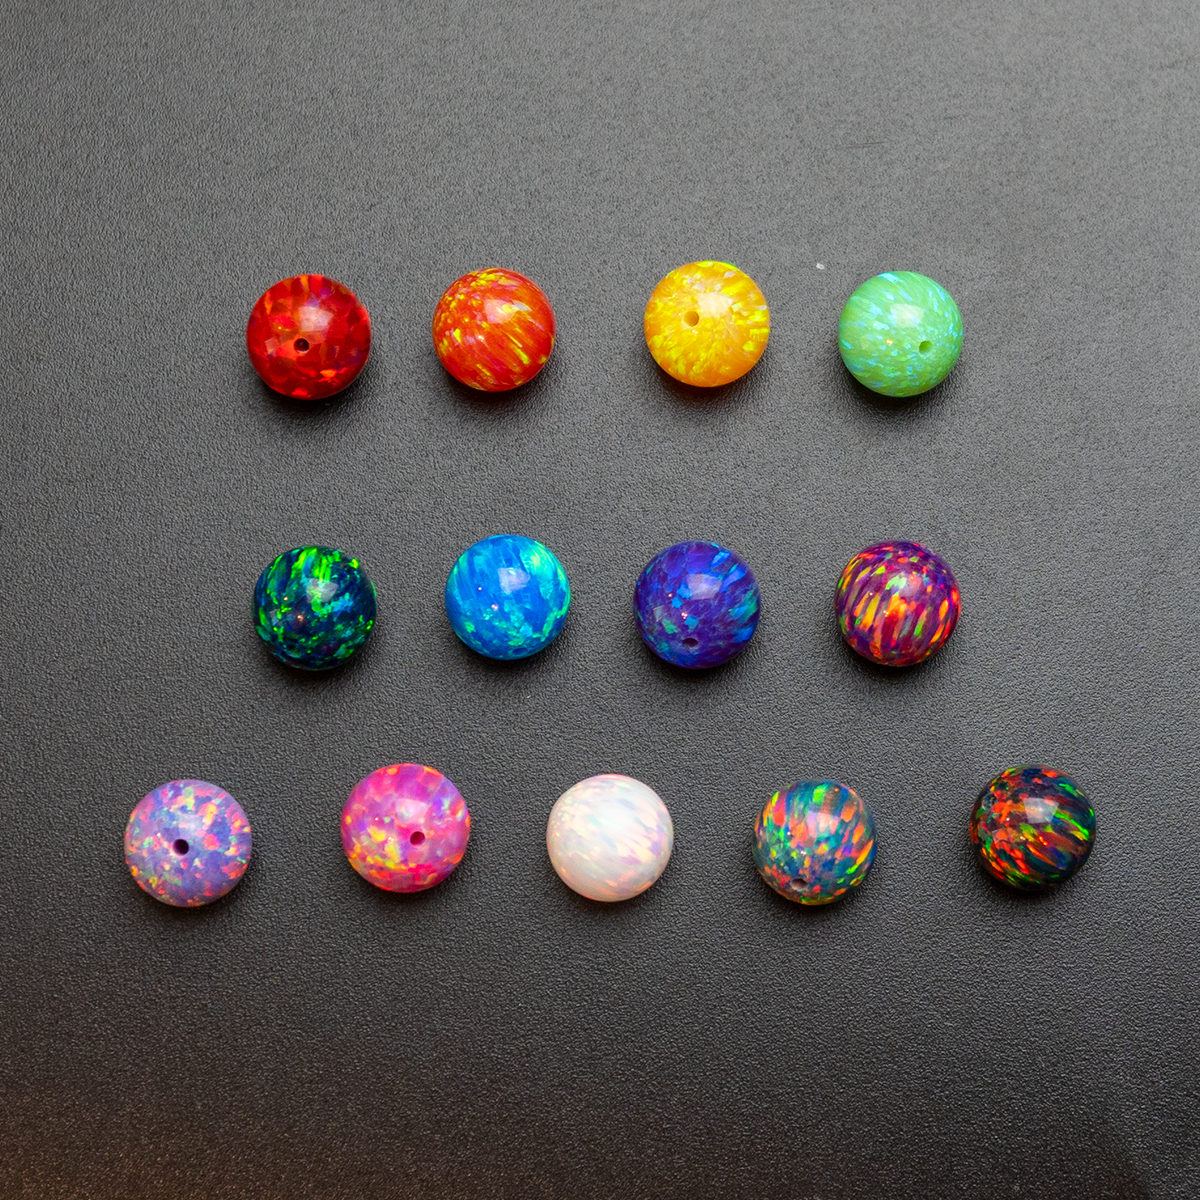 Rainbow Opal Beads - Multi Pack of 8mm Opal Beads - Beads for Jewelry